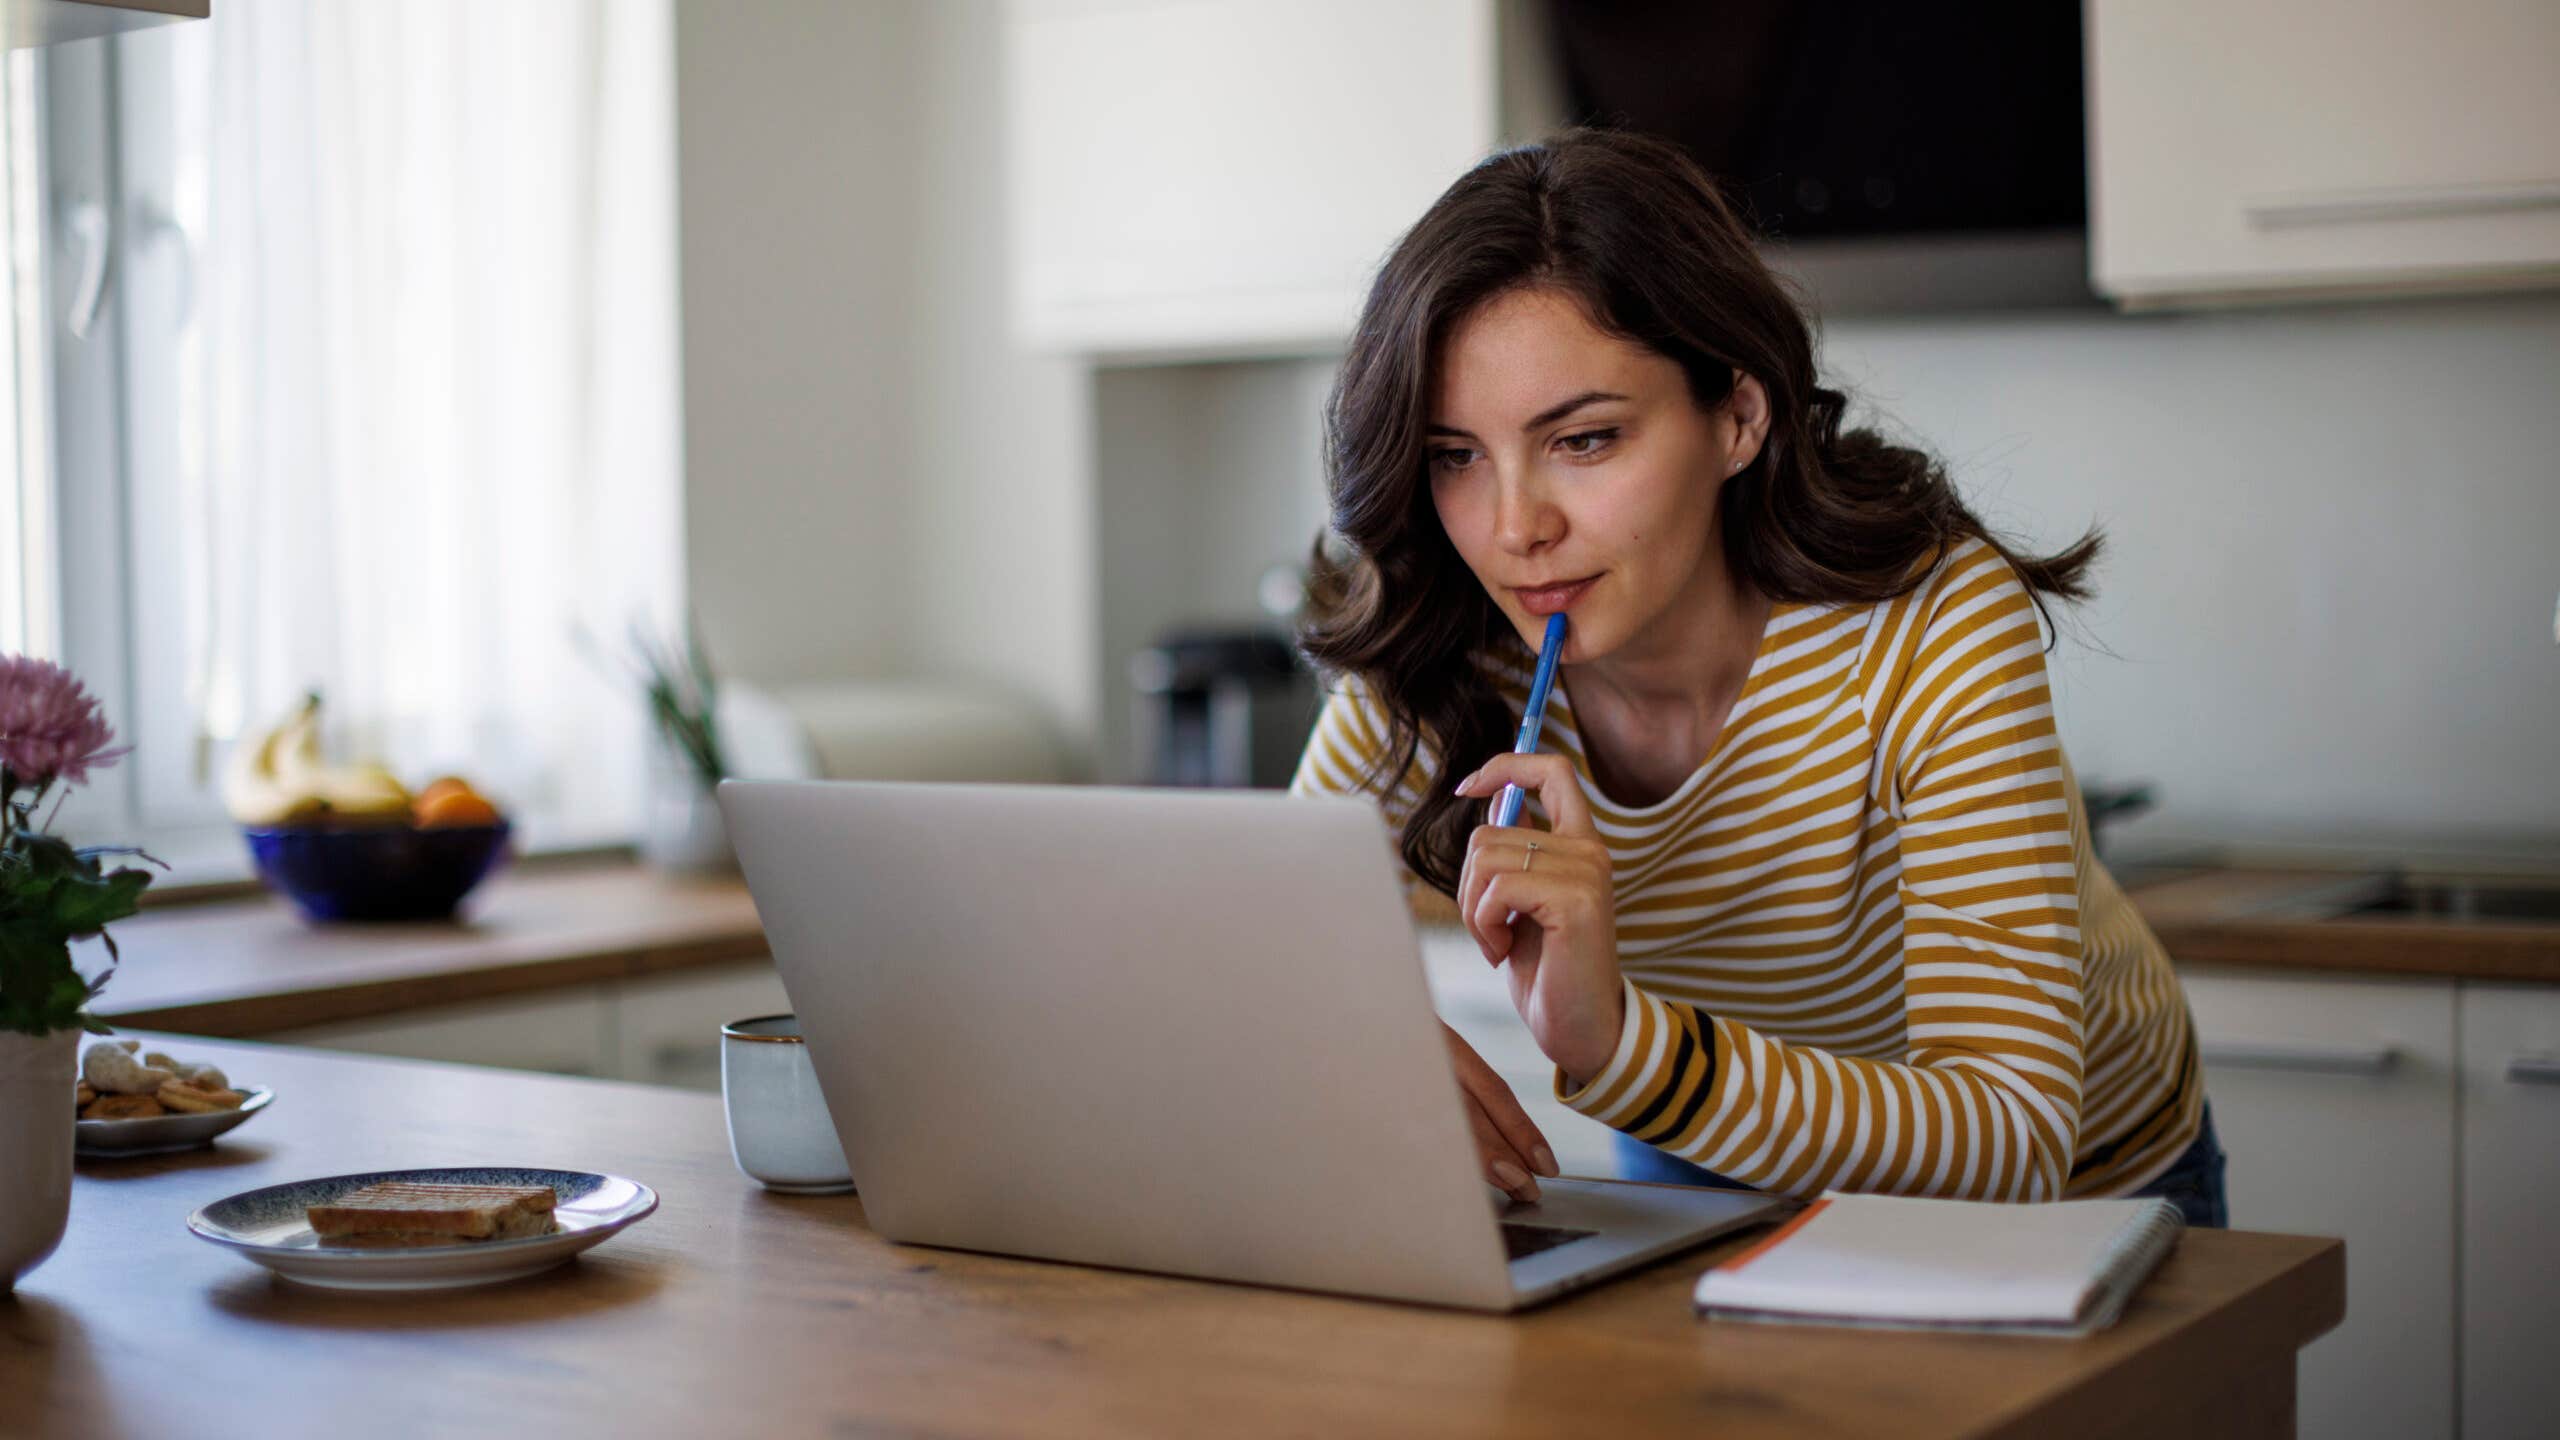 Young woman looking and comparing lenders online